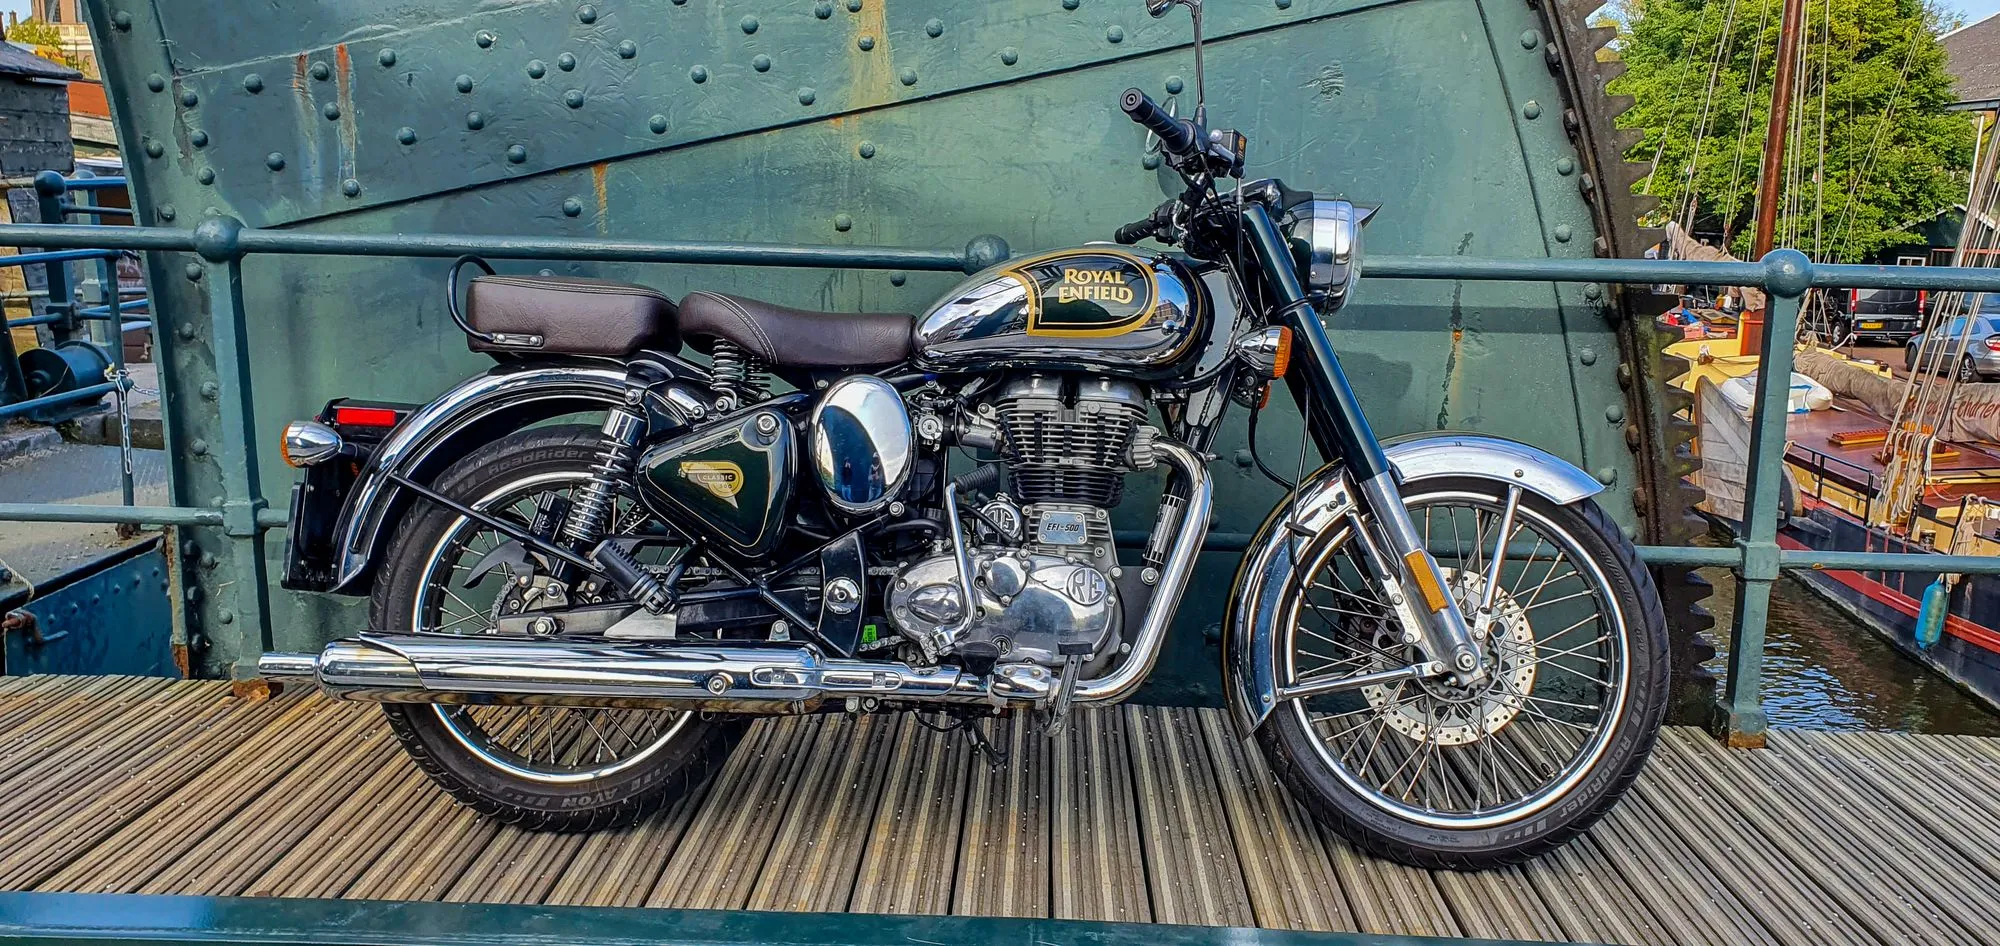 royal enfield classic fhm12